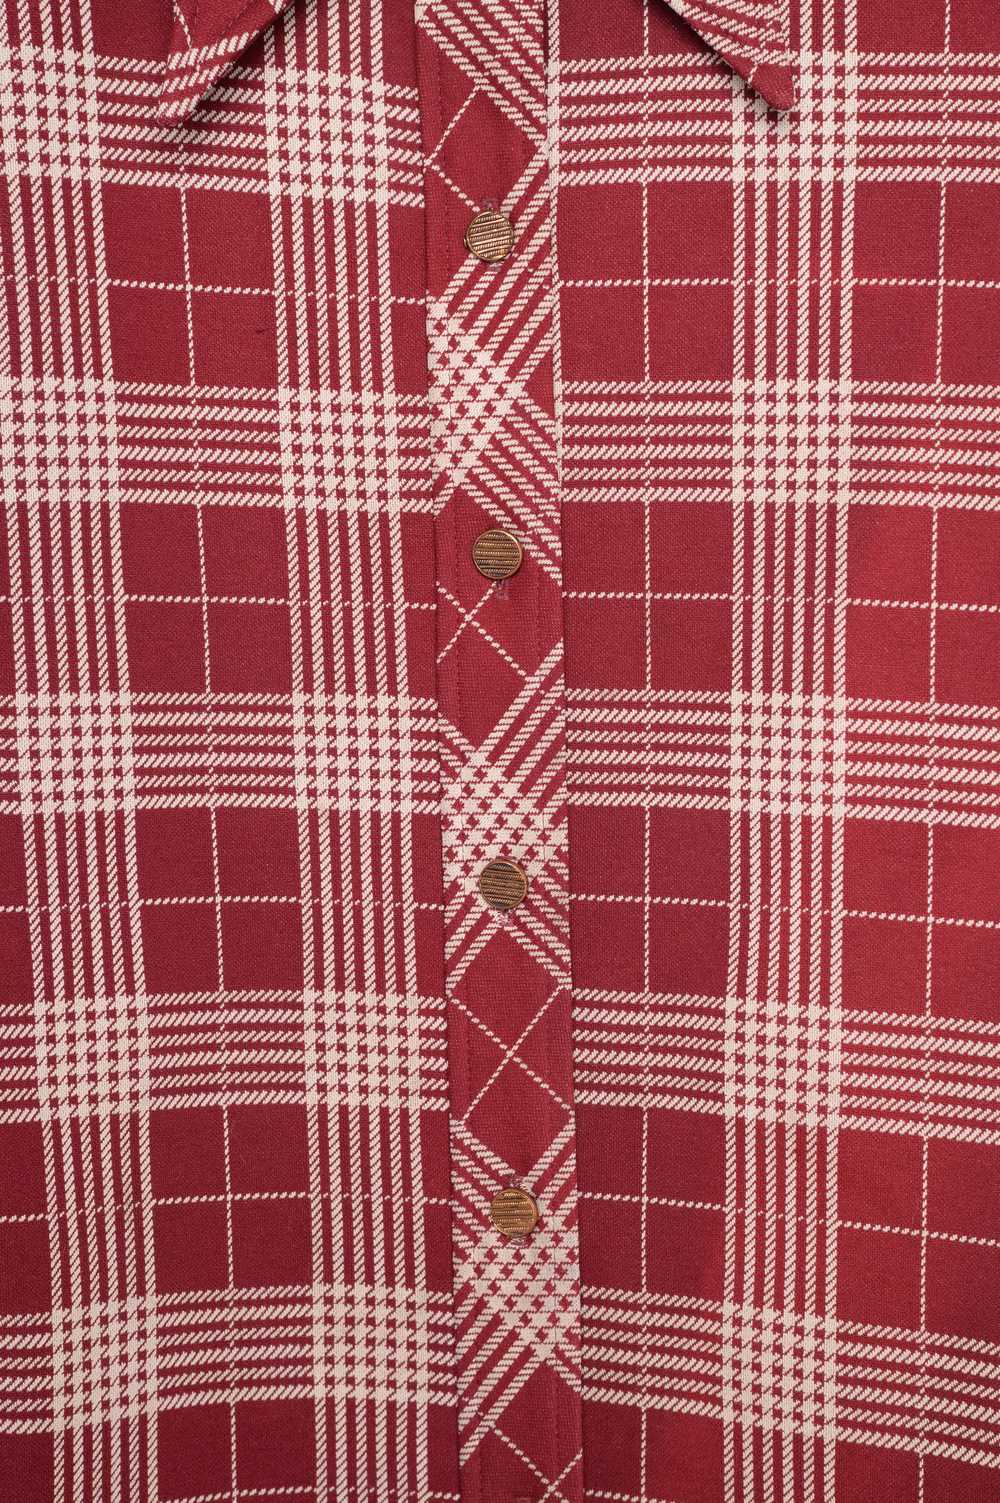 1970s Polyester Plaid Button Down - image 3